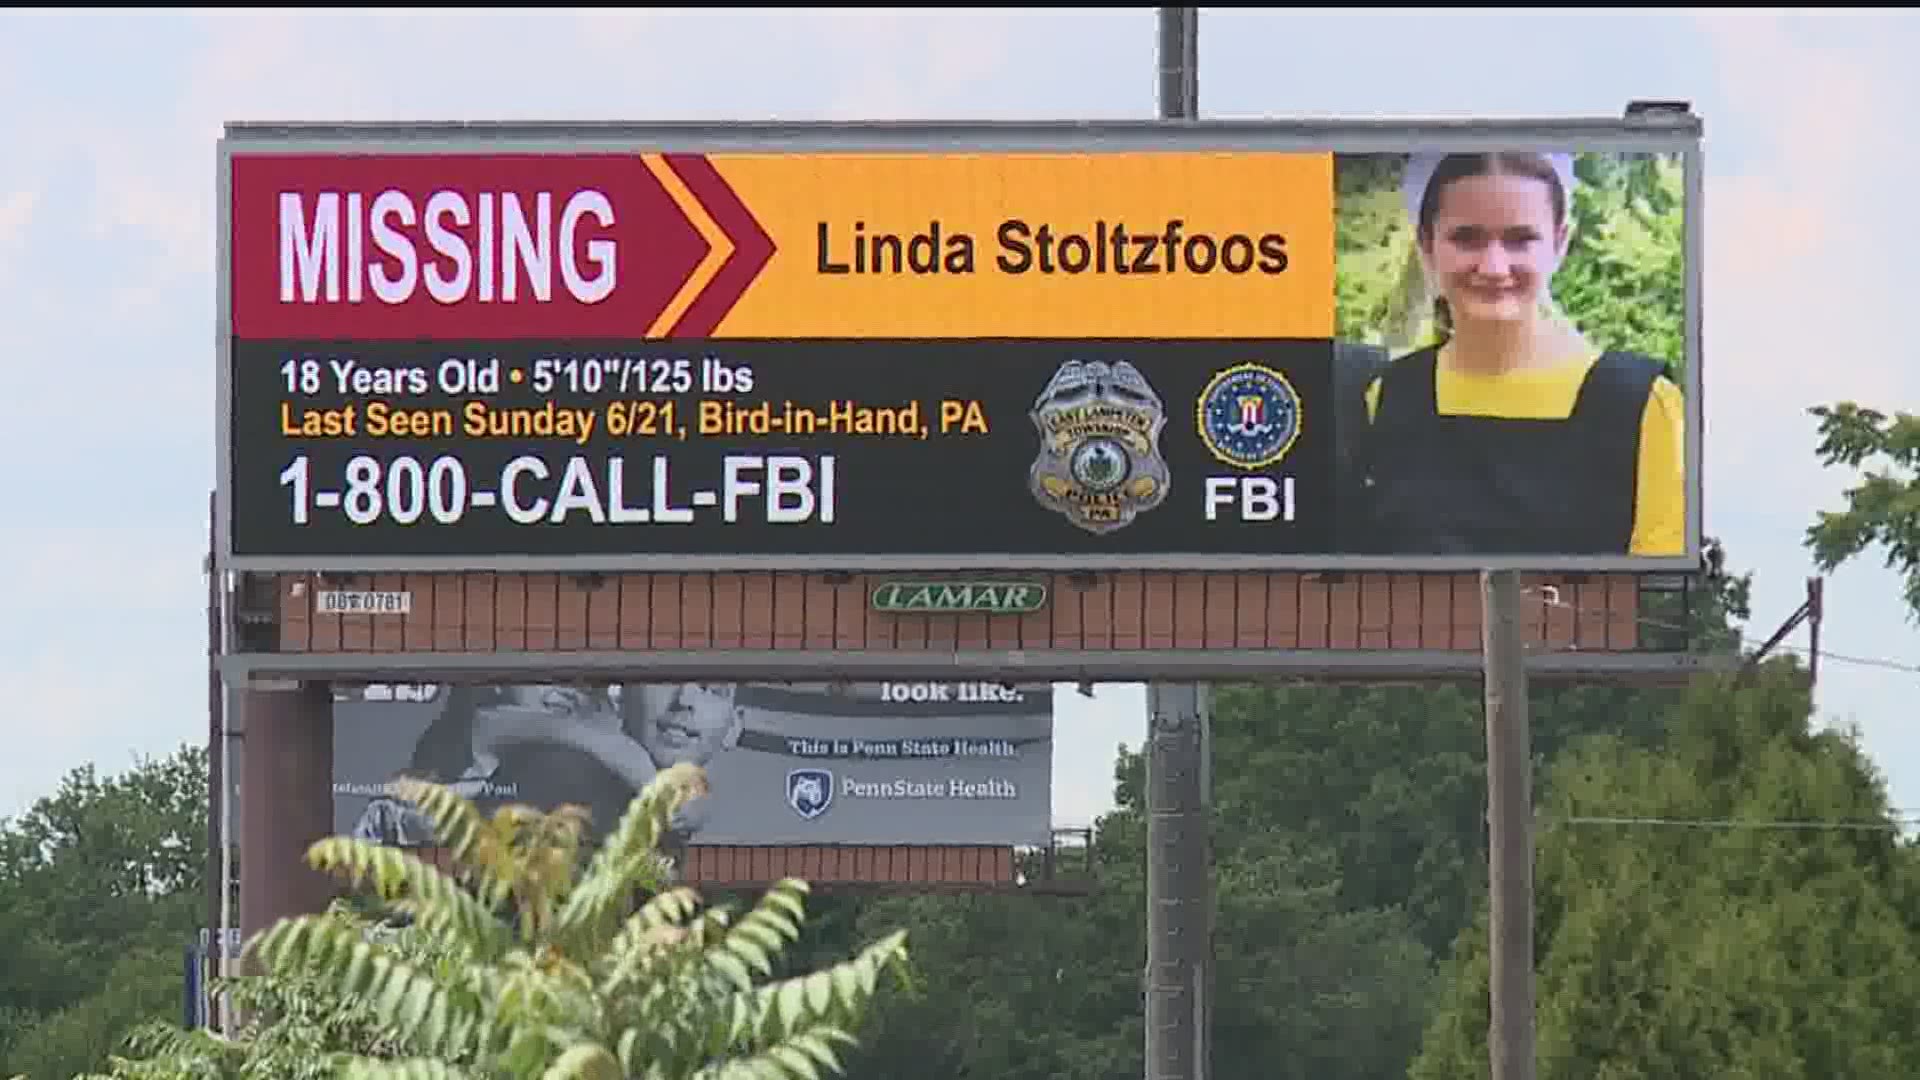 It's been just over two weeks since a Lancaster Amish woman was last seen. 18-year-old Linda Stoltzfoos disappeared on Father's Day.